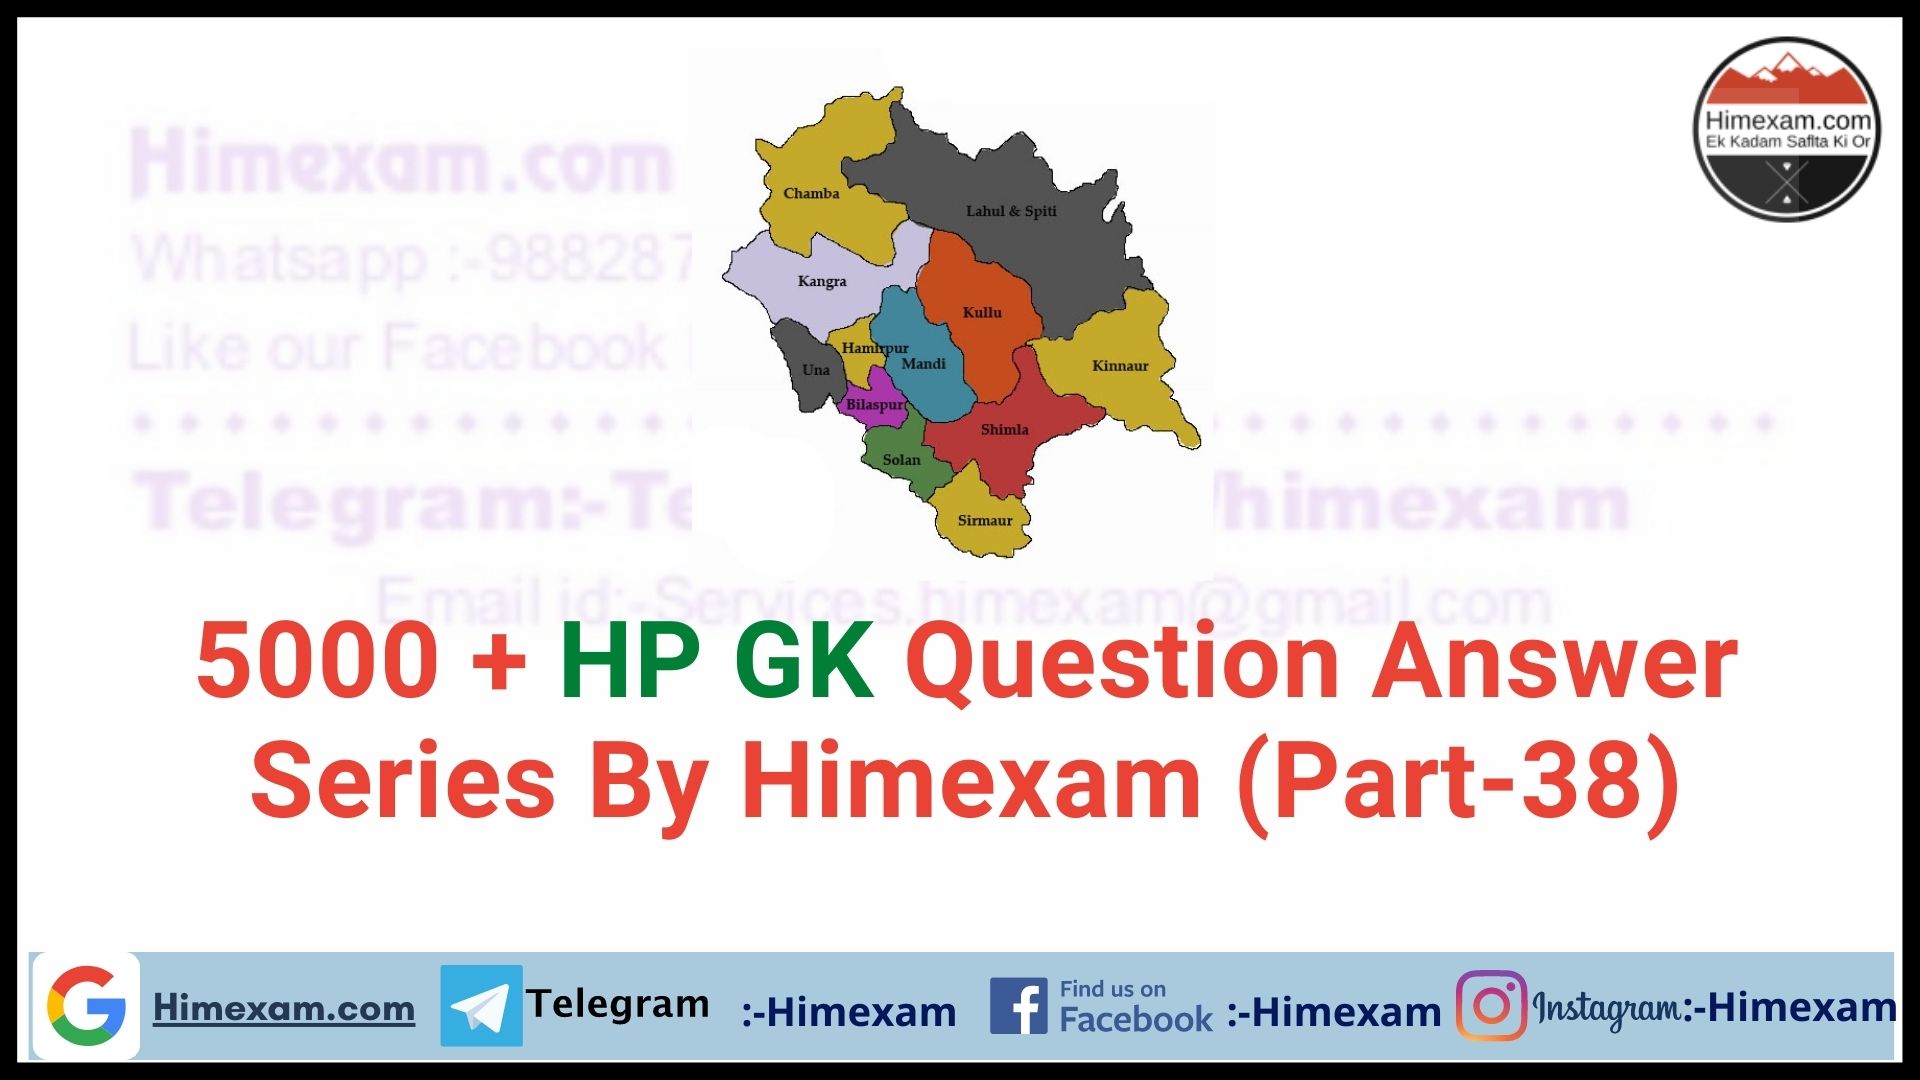 5000 + HP GK Question Answer Series By Himexam (Part-38)